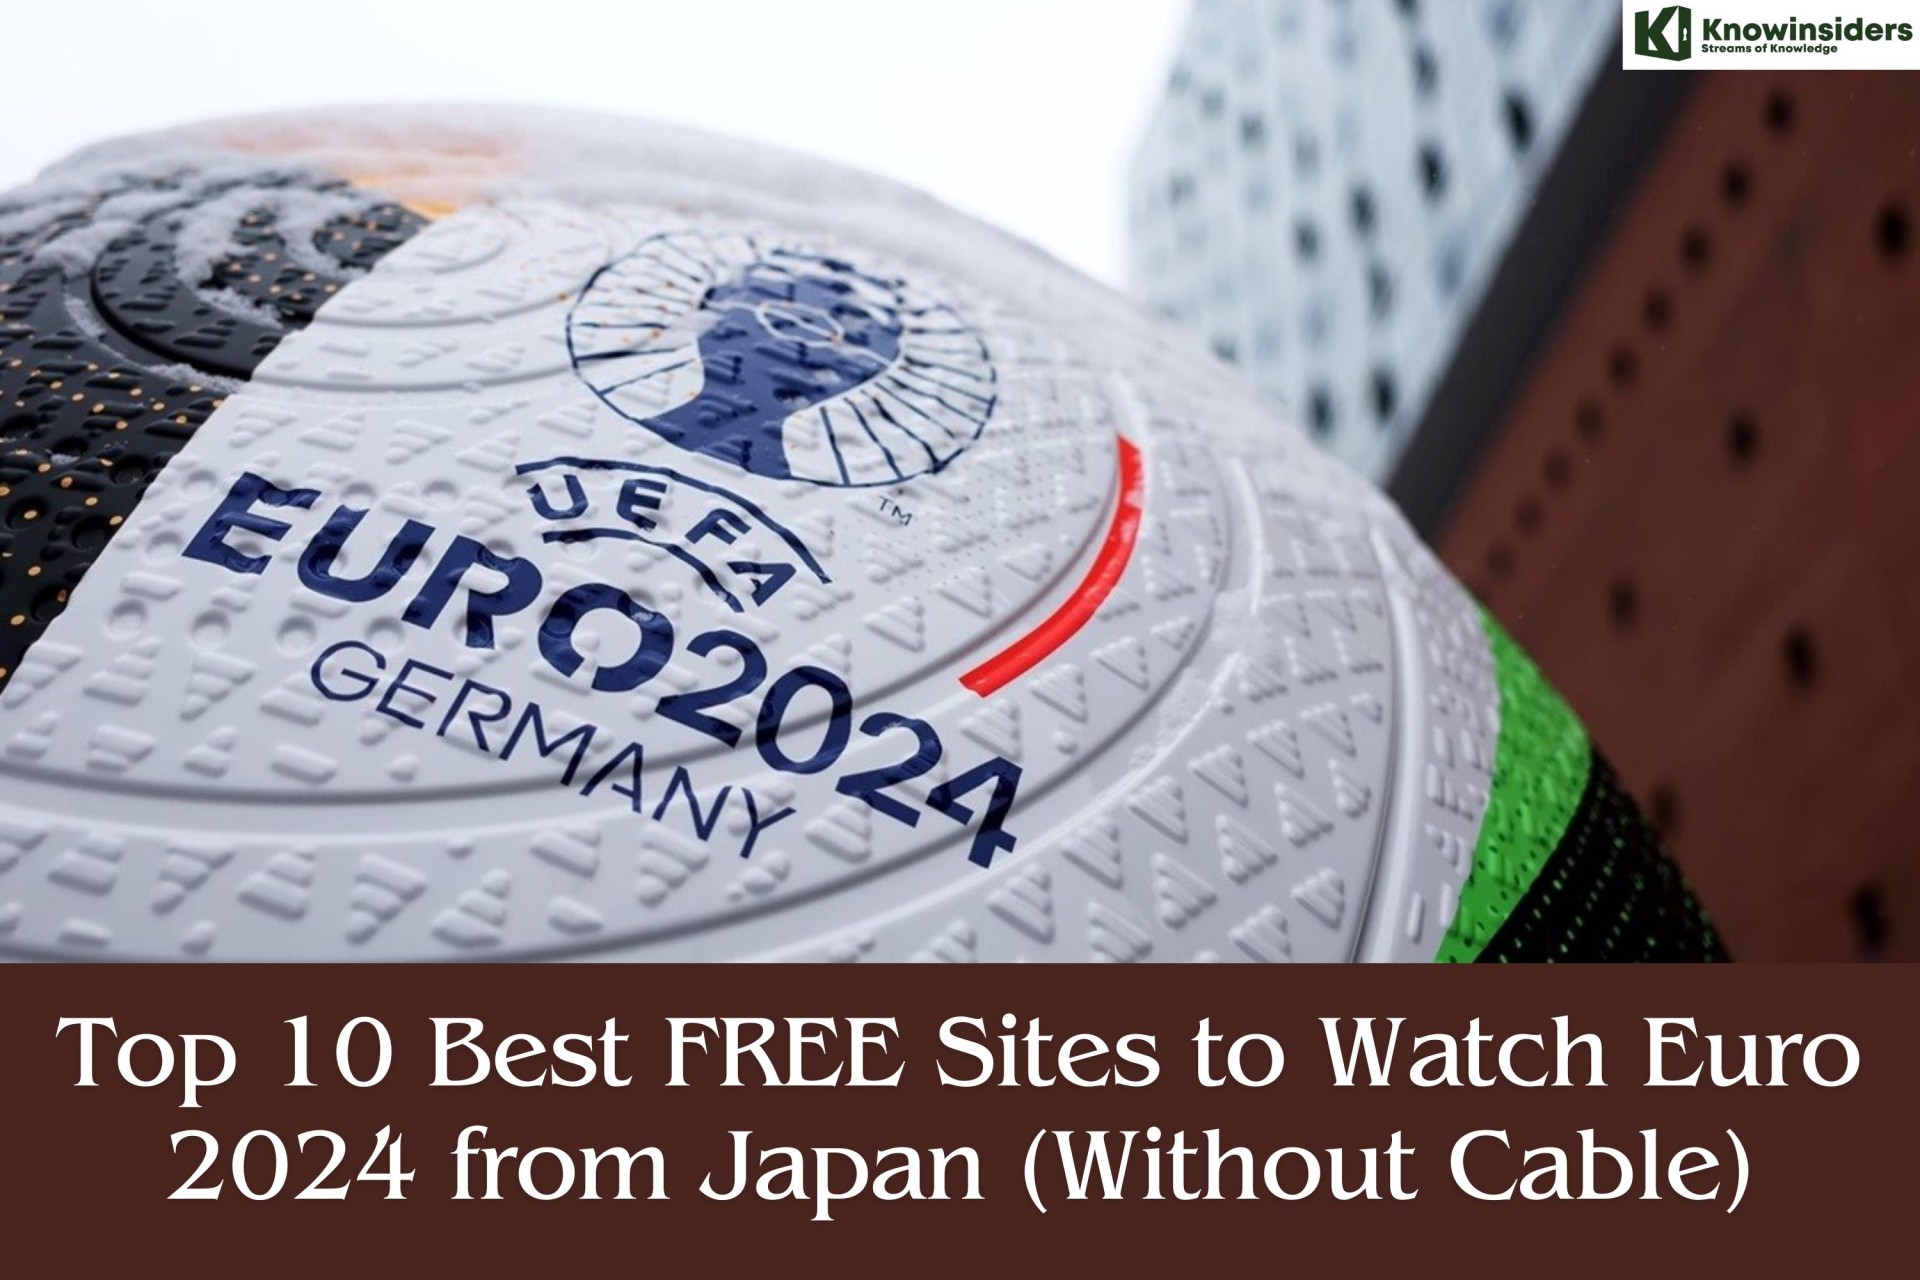 Top 10 Best FREE Sites to Watch Euro 2024 from Japan (Without Cable)